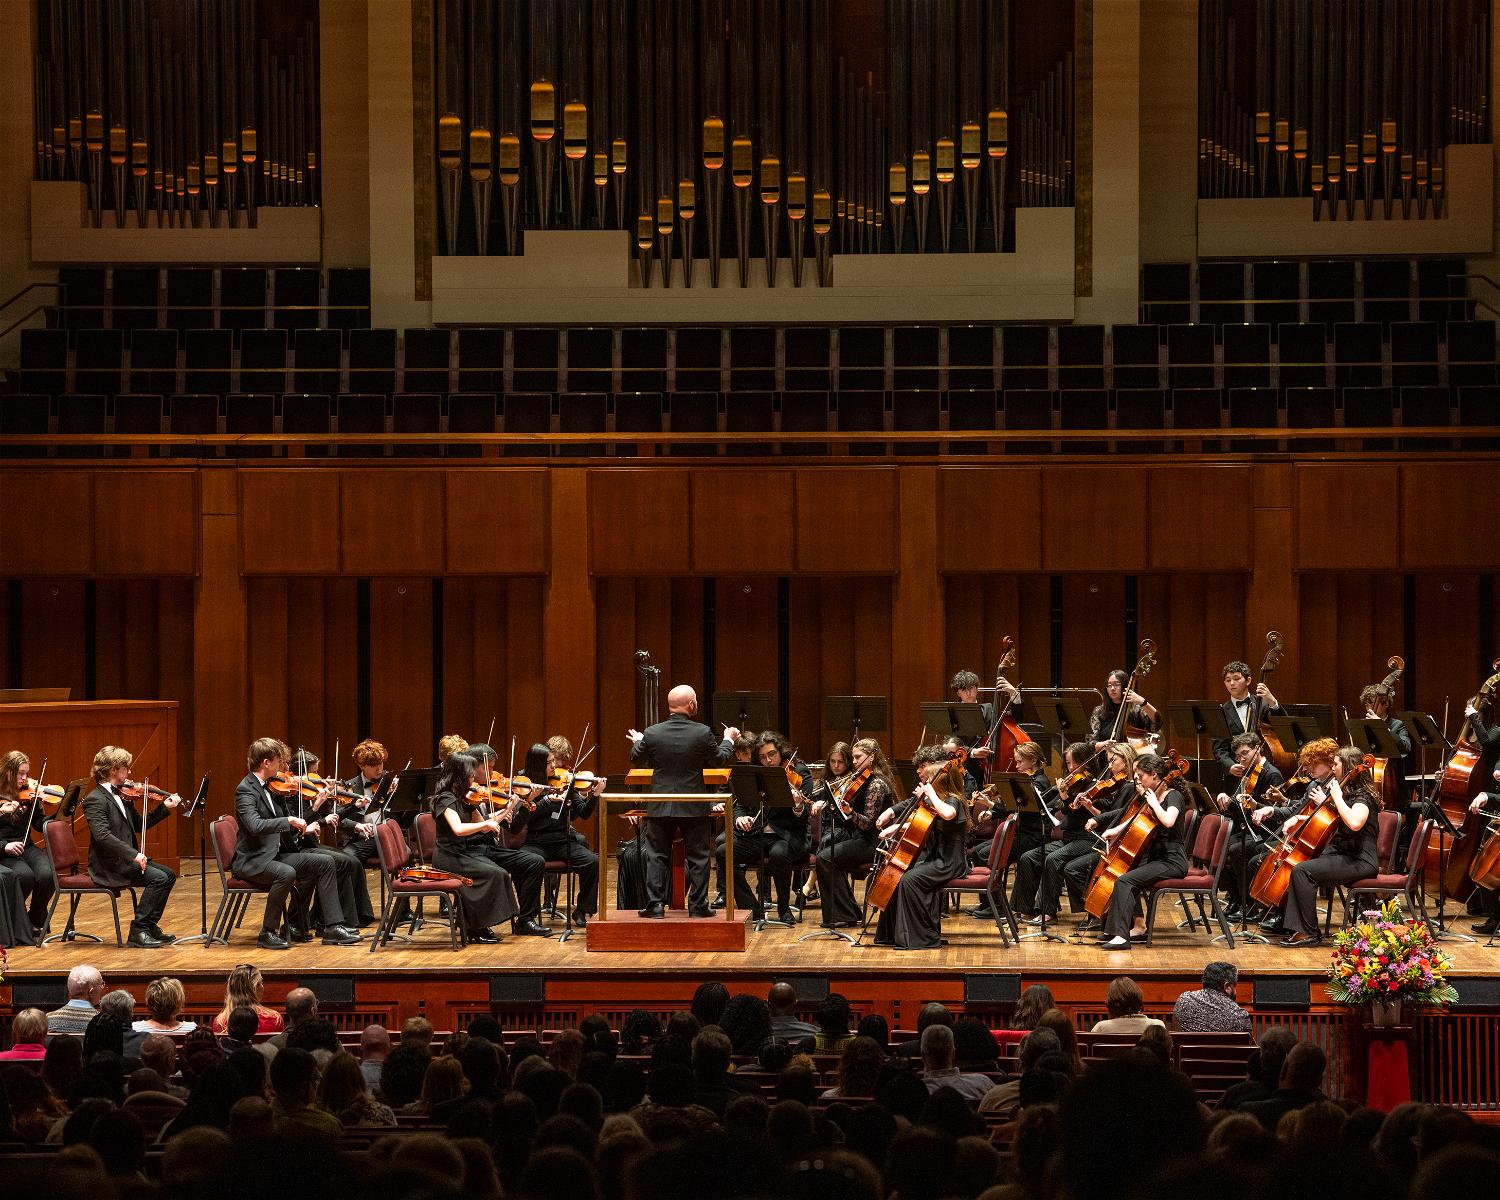 Michael Susinno conducts the Northport High School orchestra at its February performance at the Kennedy Center in Washington DC. Photo courtesy of the Kennedy Center. 